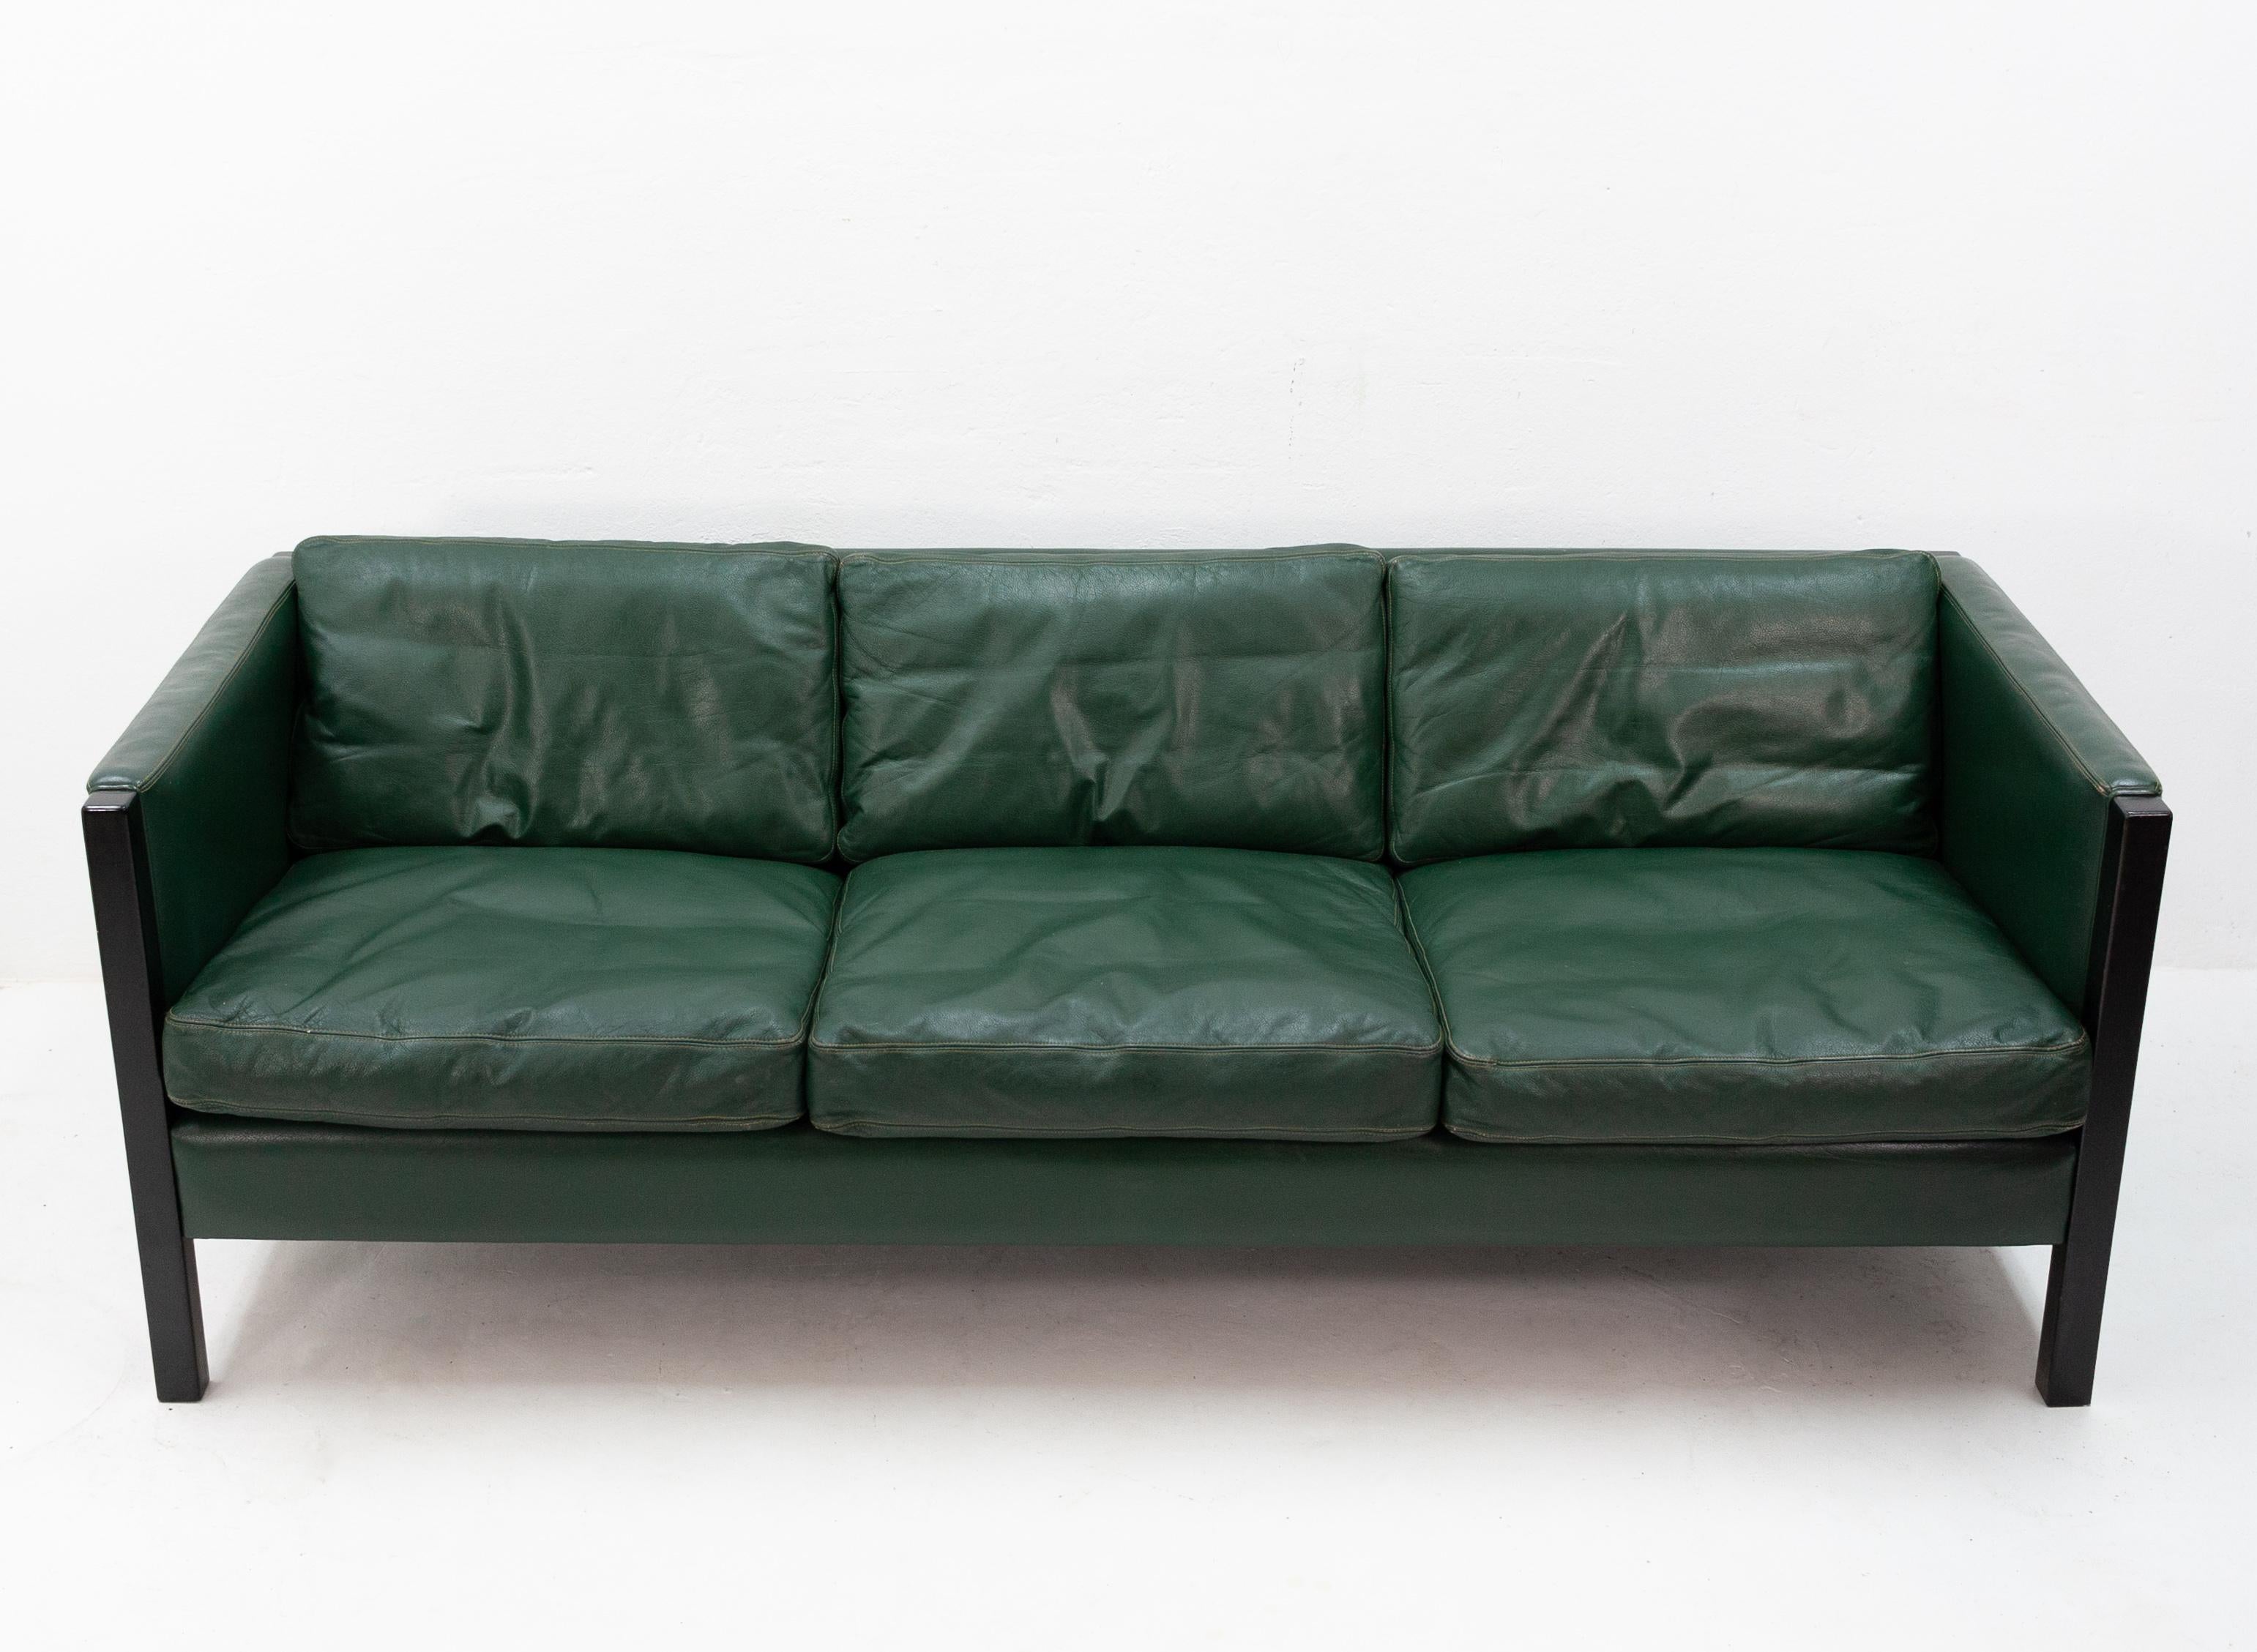 Lovely sofa by Leolux Dutch quality furniture maker for over 50 years. Superb quality. Racing green color. Everything is right on this sofa. Love the model to. 1970s With feathers filling cushions.
Very good condition.





 